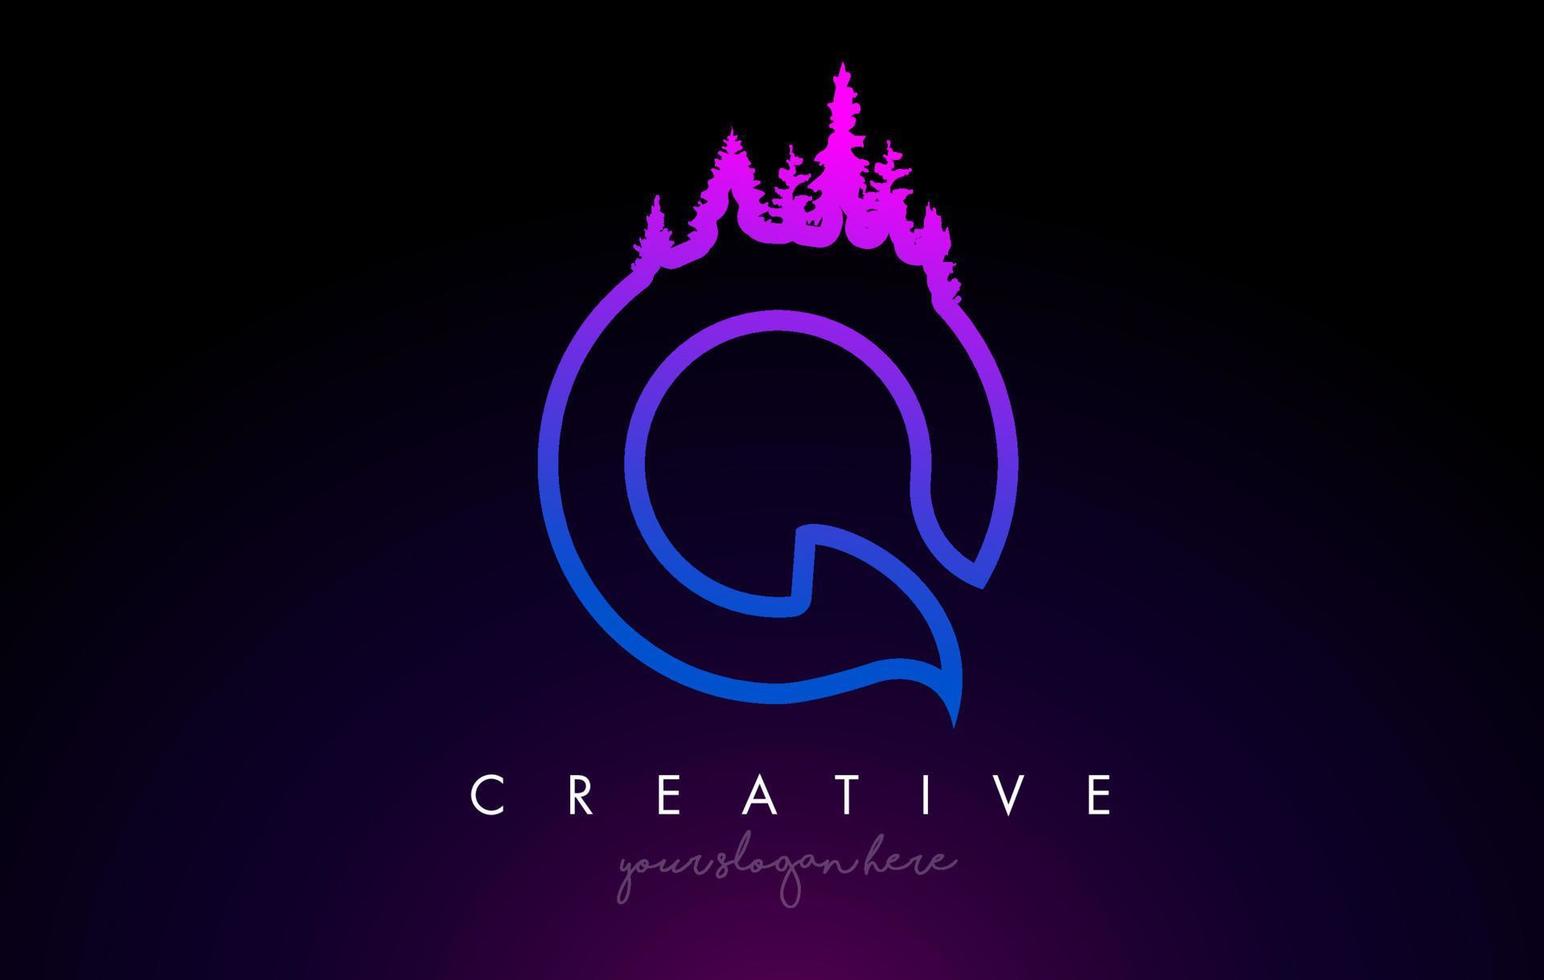 Creative Q Letter Logo Idea With Pine Forest Trees. Letter Q Design With Pine Tree on Top vector